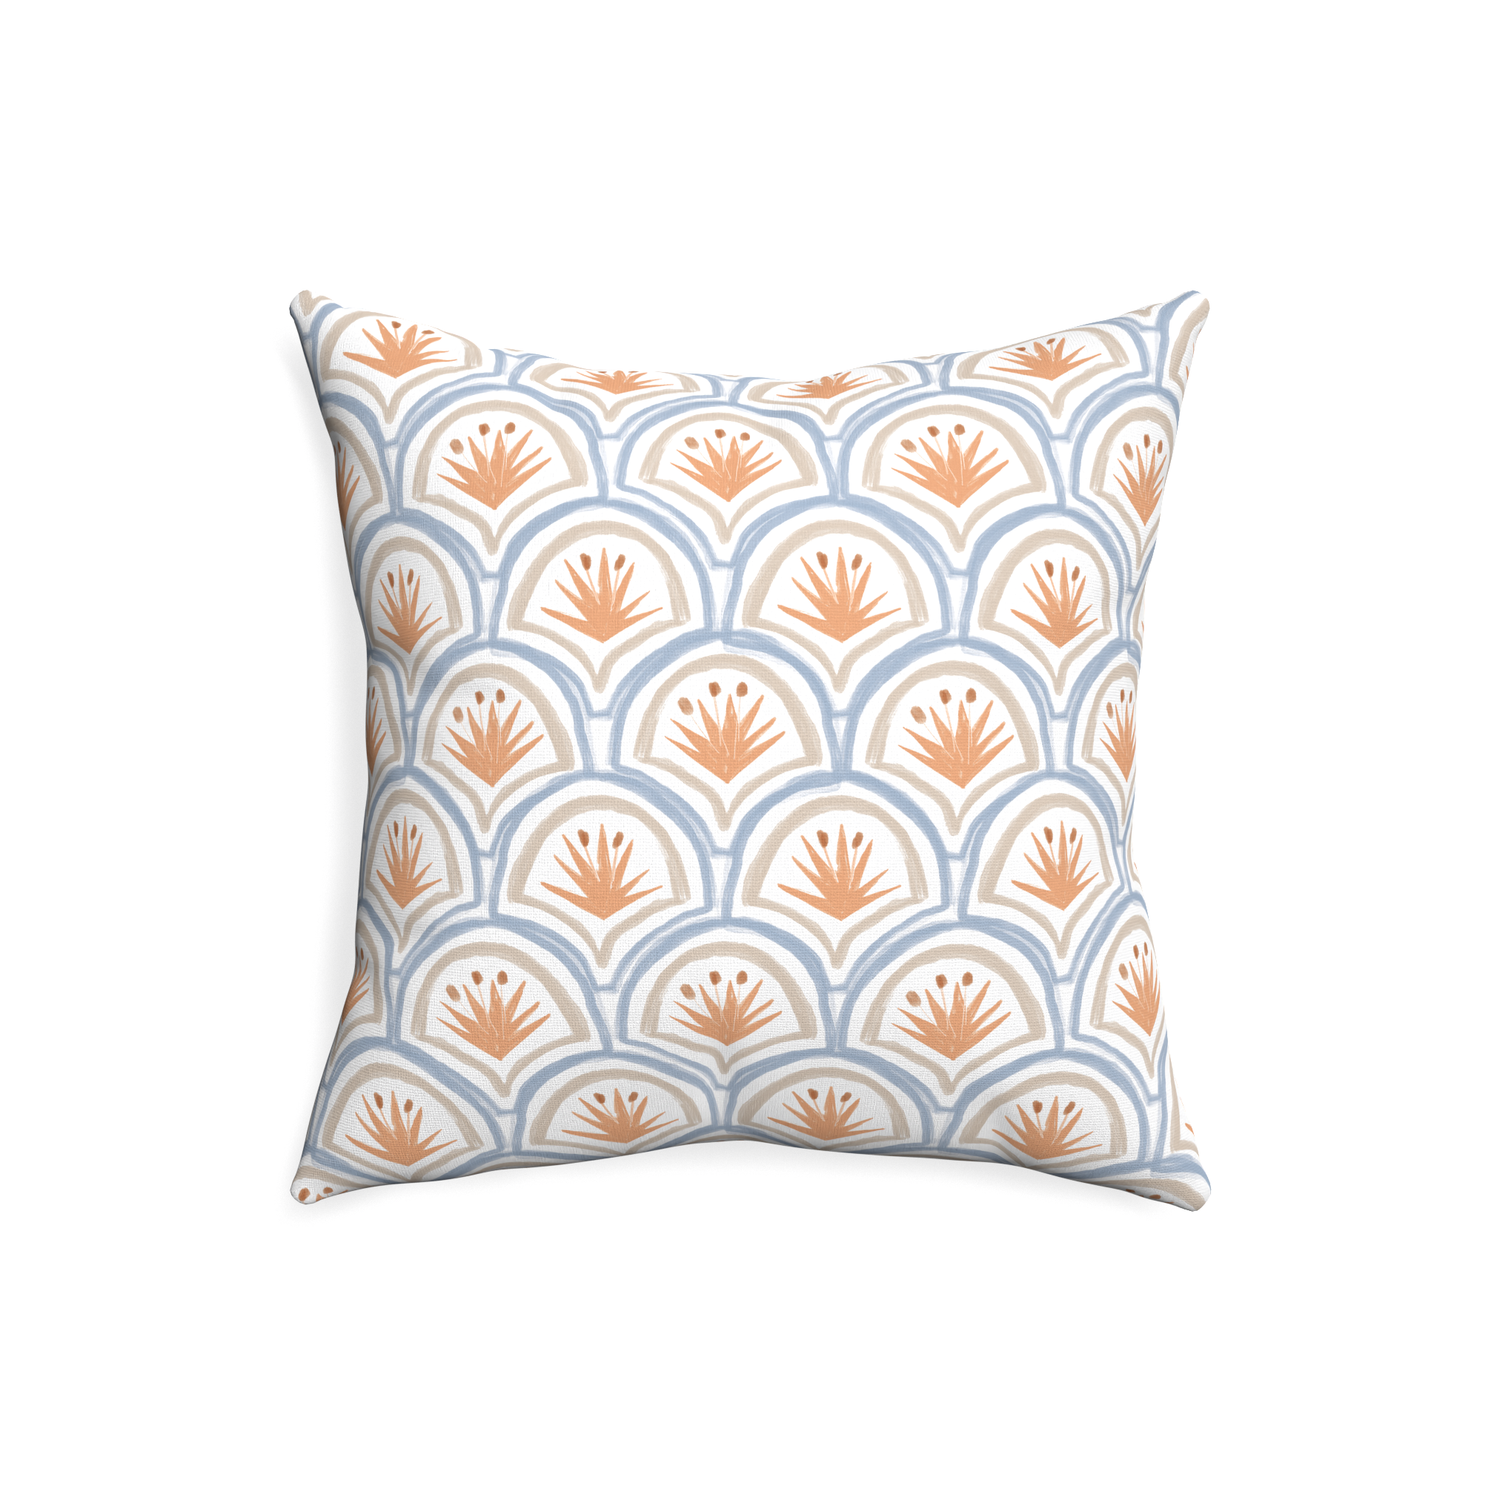 20-square thatcher apricot custom art deco palm patternpillow with none on white background